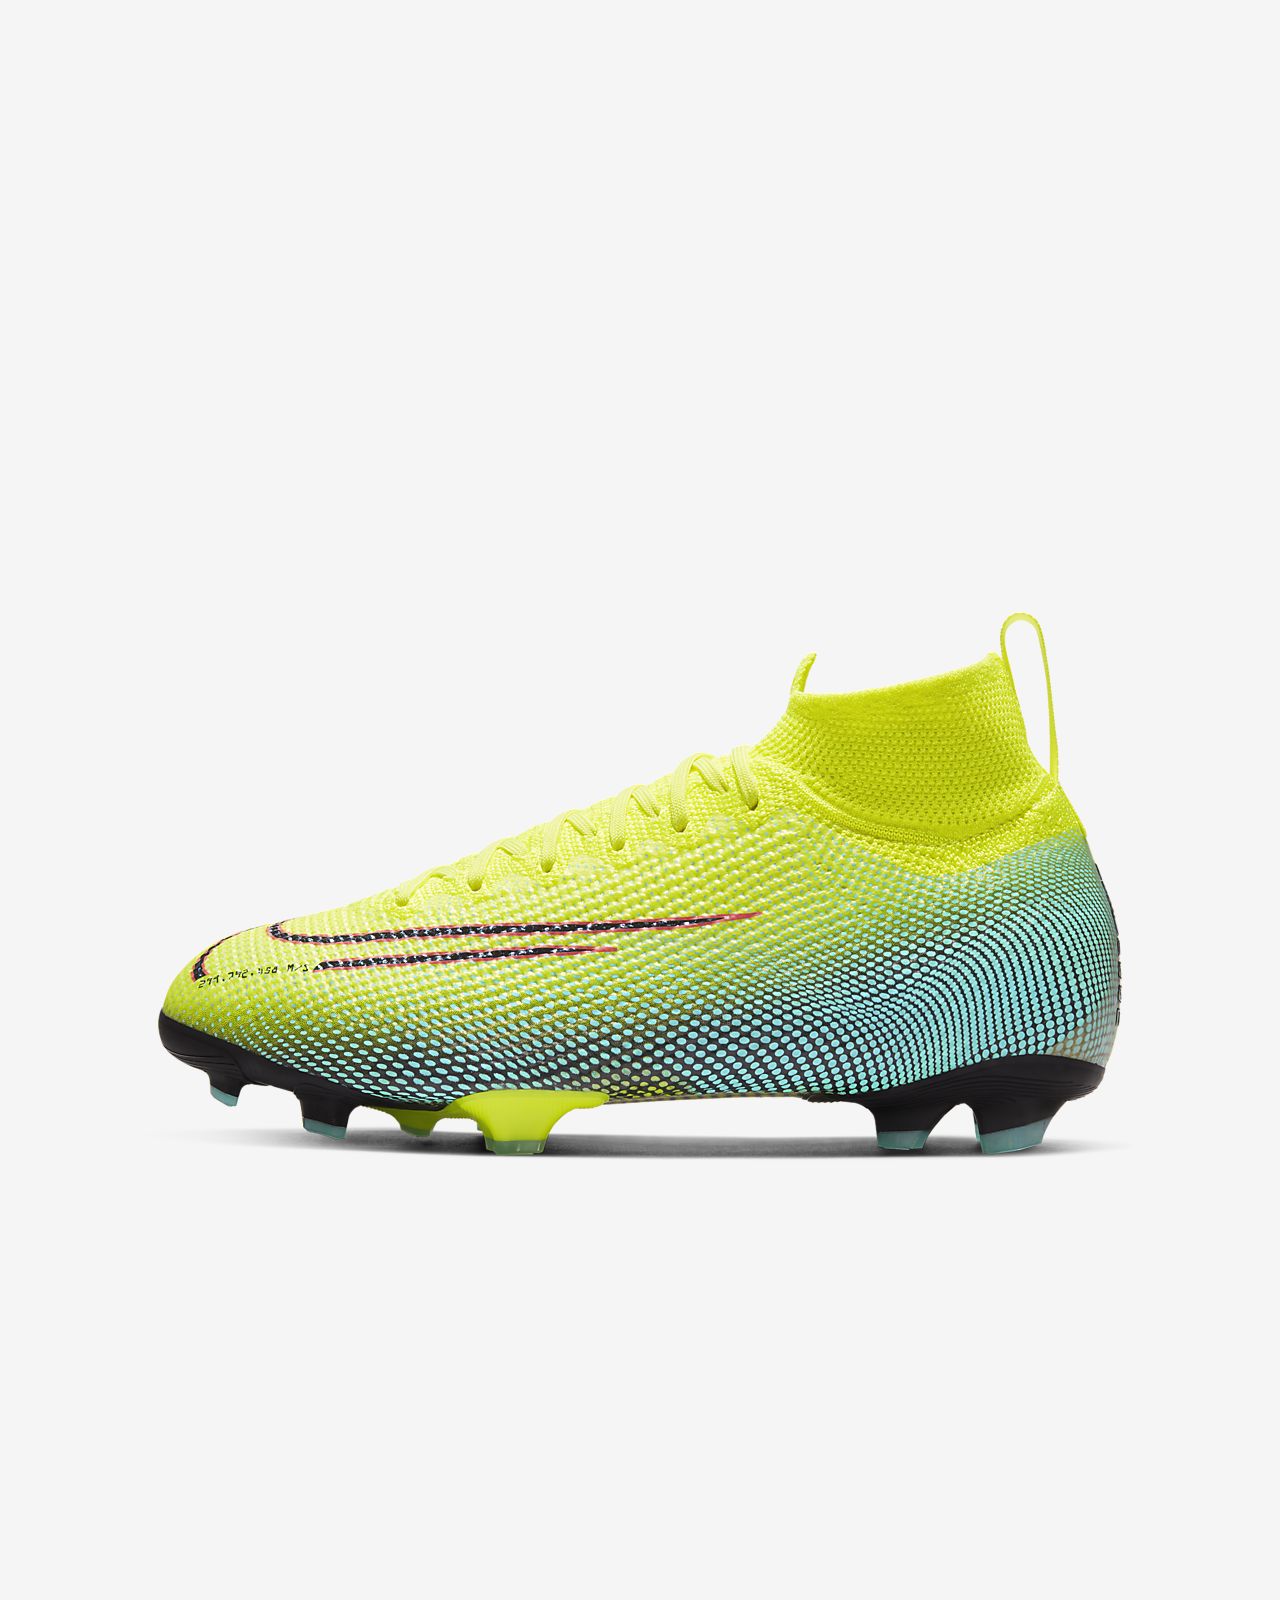 old mercurial cleats